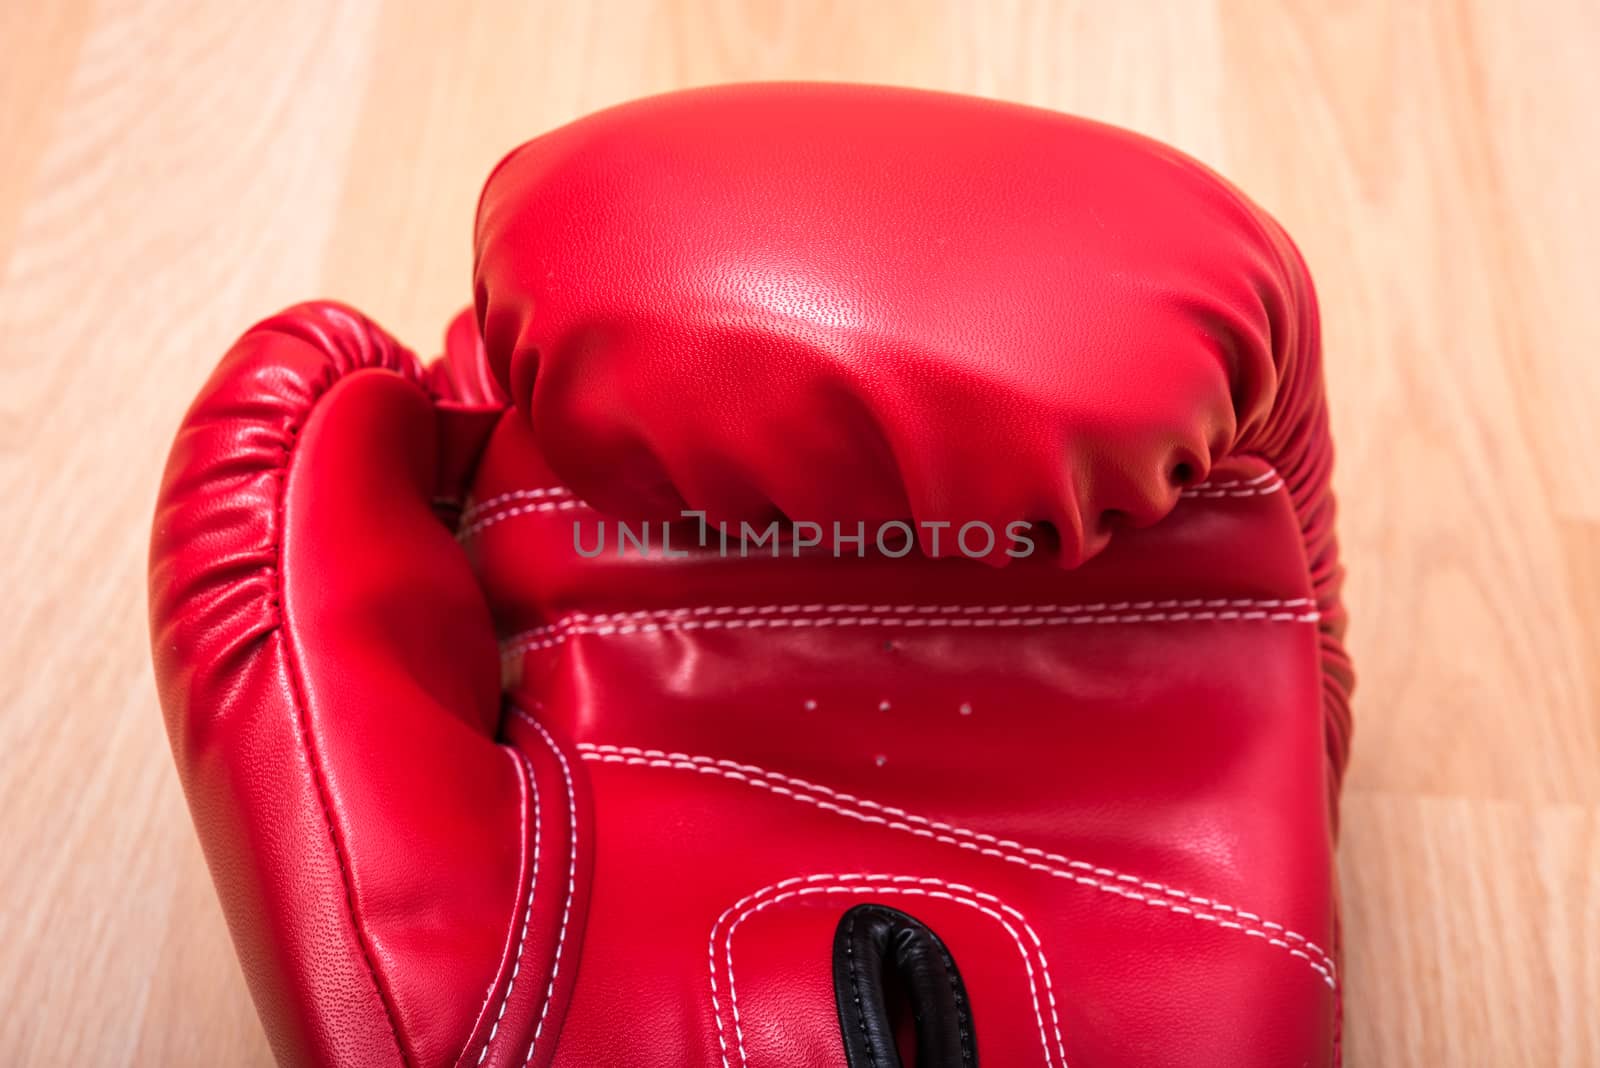 Red boxing gloves on wooden table